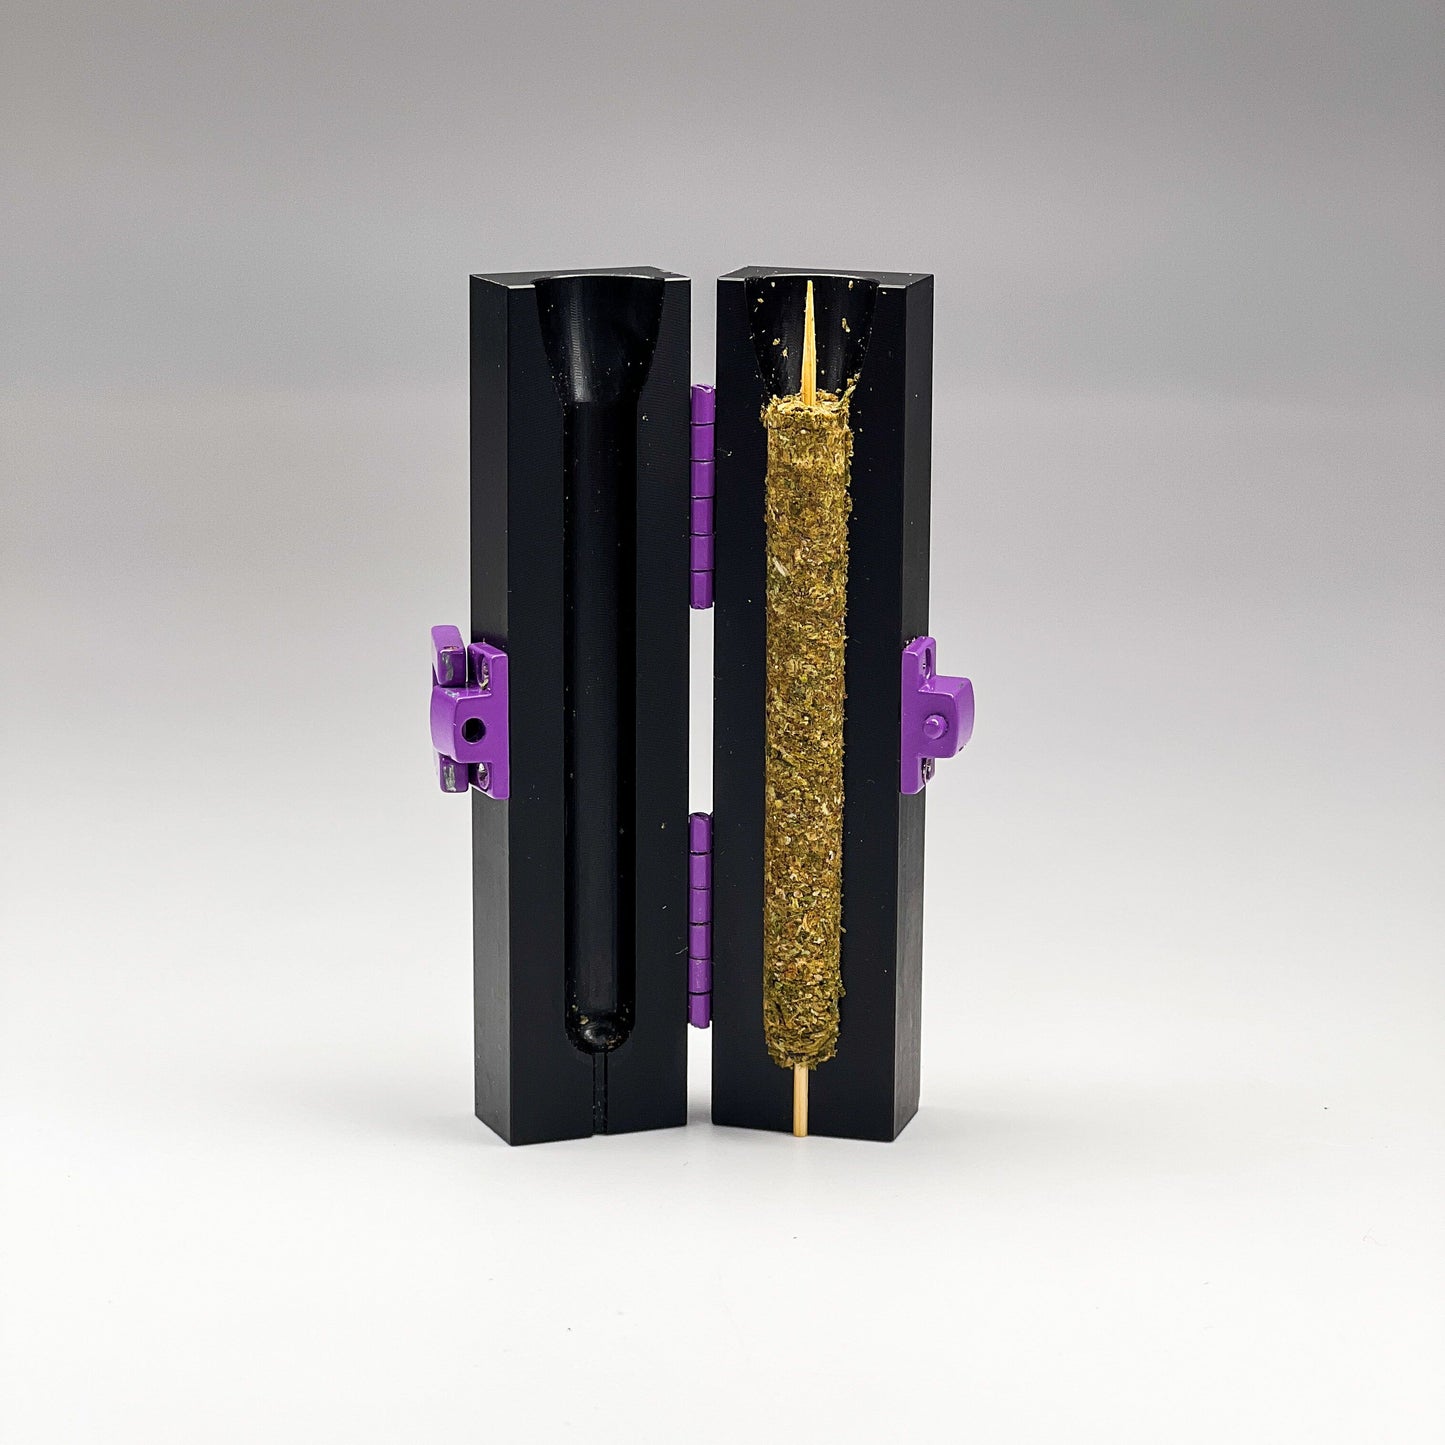  Purple Rose Supply: Cannagar Blunt Small Size fits (3.5-7g) and  Personal Size fits (2-4g) - Easy to Use Cigar Blunt Molds - Comes with 2  sizes + accessories - Better than